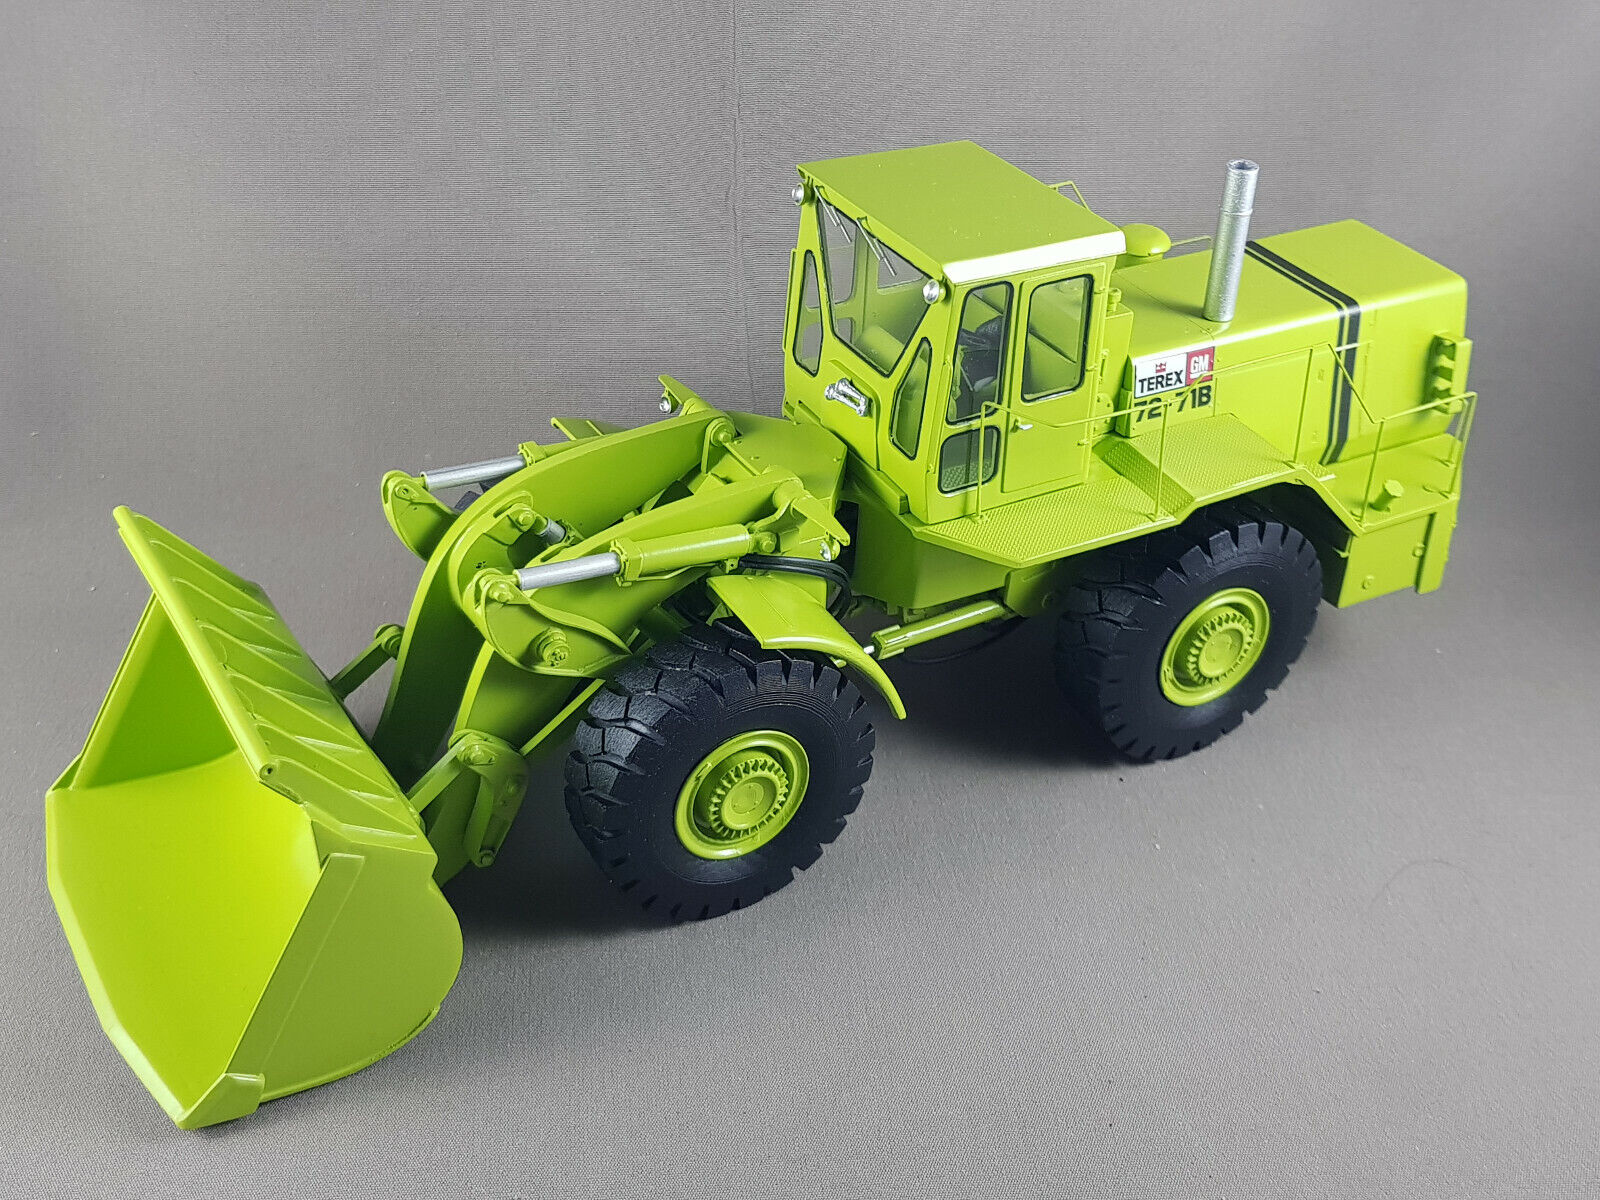 Terex 72-71b Front Loader High Detailed 1:50 Scale Resin Model Limited Edition